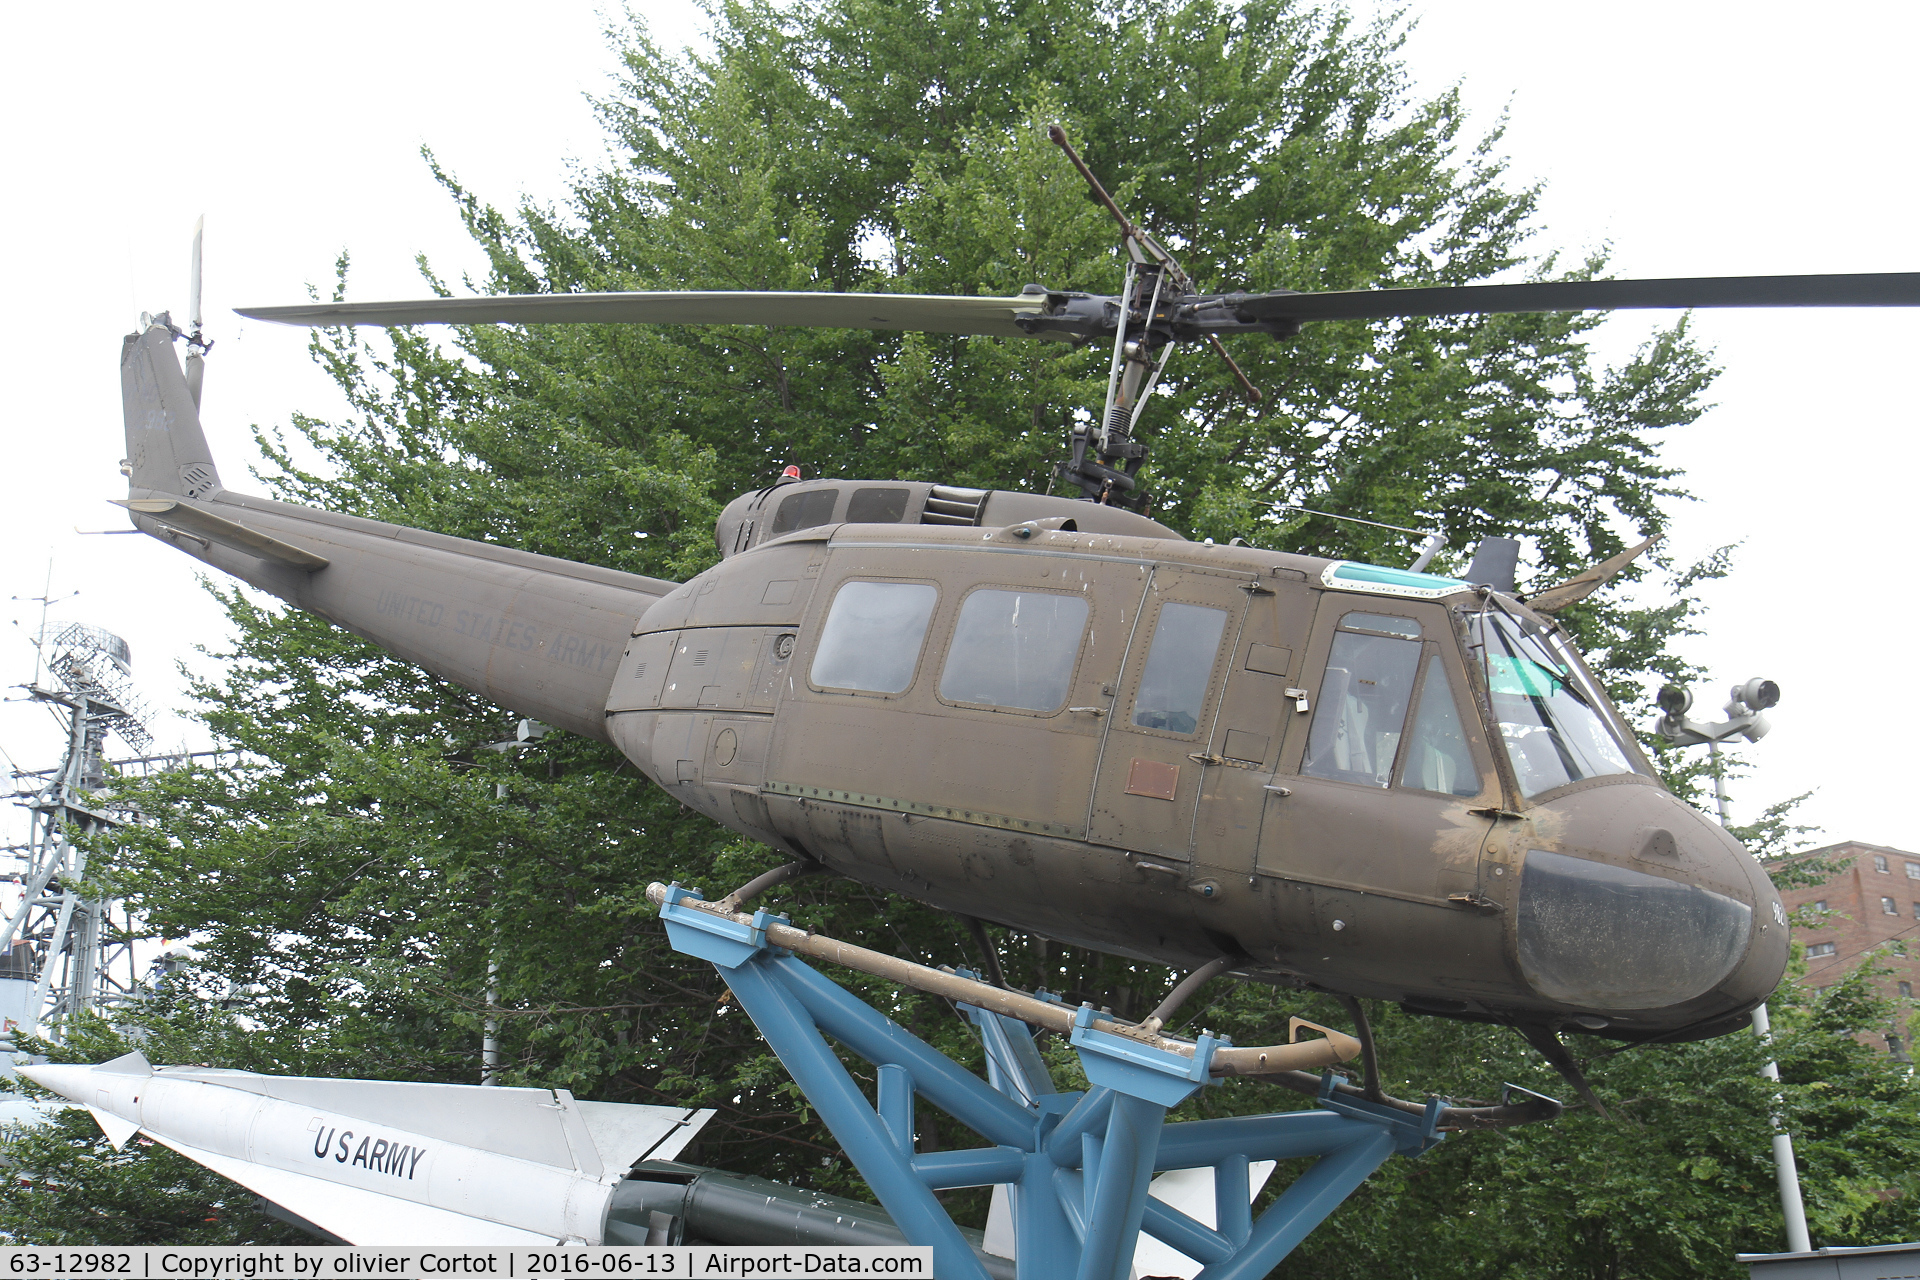 63-12982, 1963 Bell UH-1H Iroquois C/N 4178, another preserved Huey